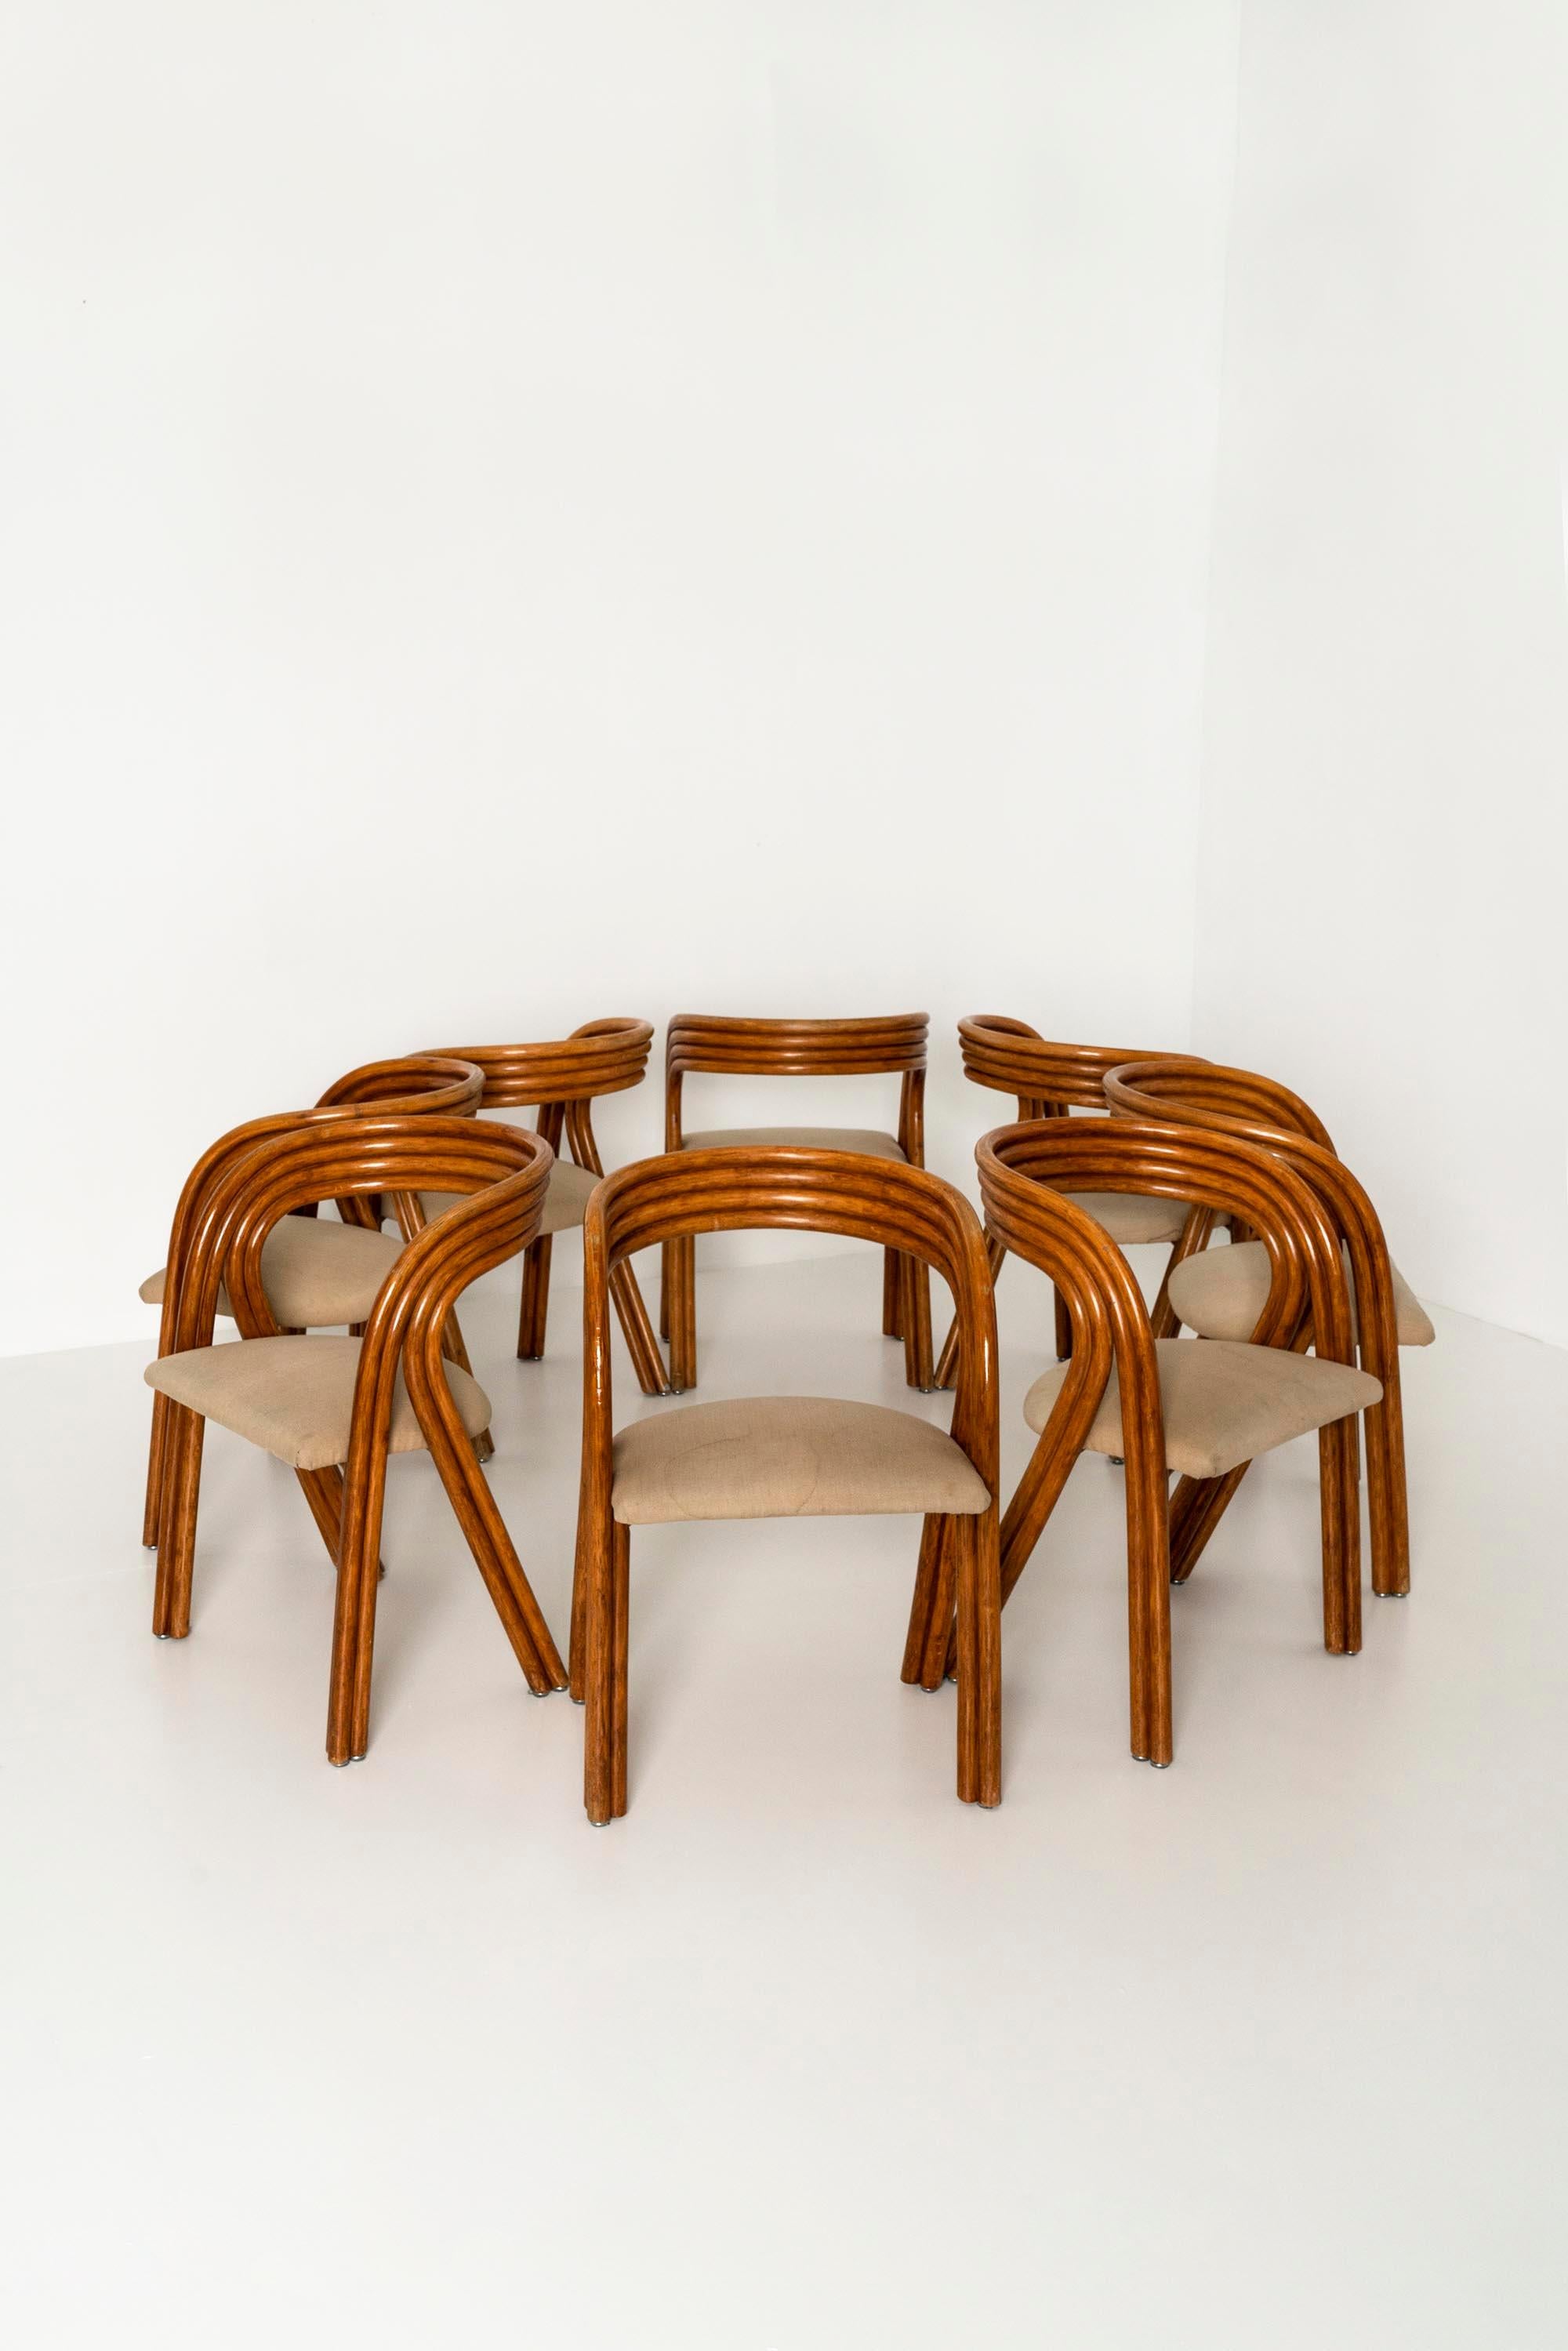 Belgian 8 Dining Chairs, RD 1526, in Manou Wood by Axel Enthoven for Rohé Design, 1980s